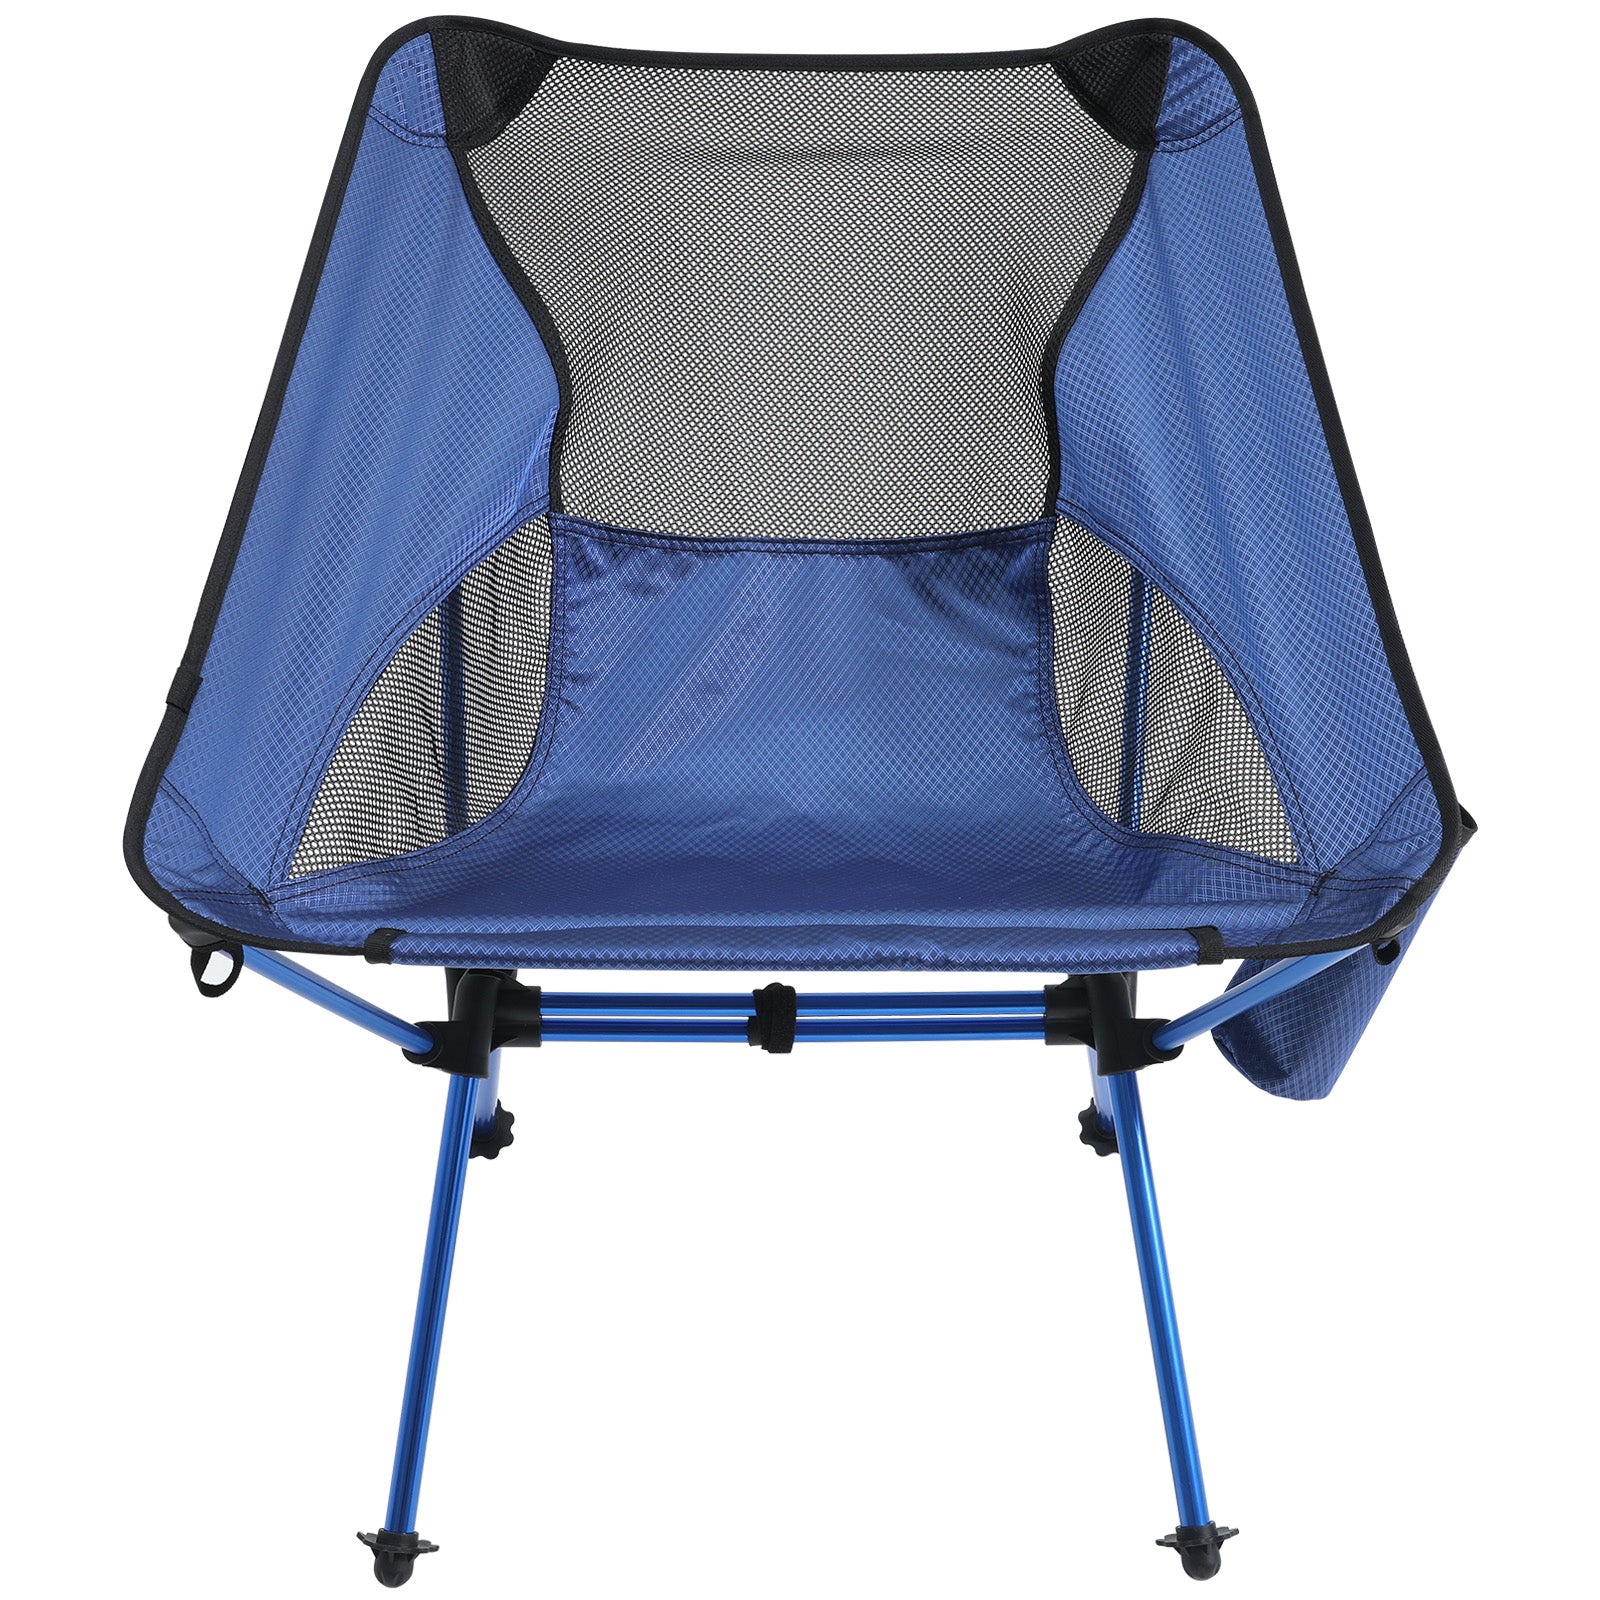 Ultralight Portable Camping Chairs-Large